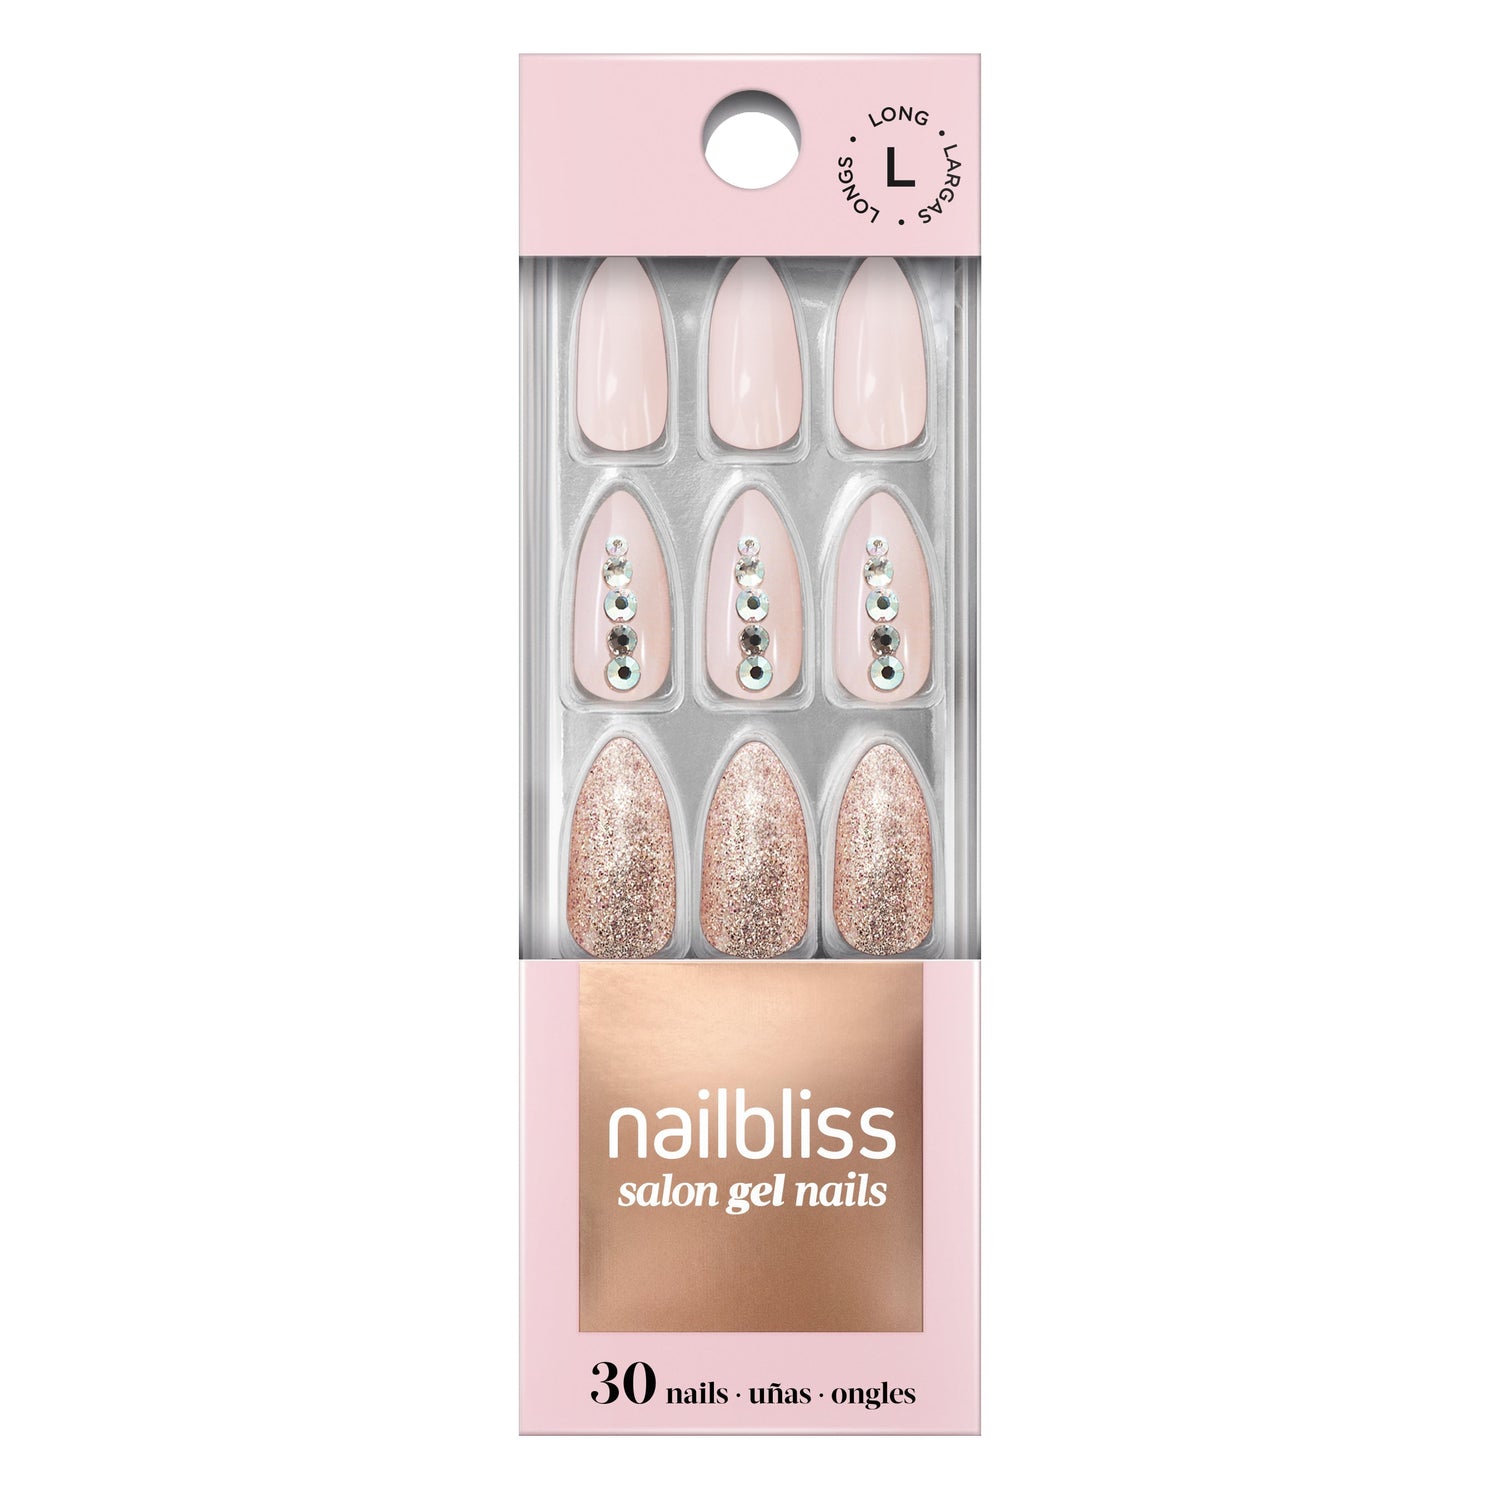 Dashing Diva nailbliss long stiletto baby pink glue-on gel nails with rhinestone and silver glitter accents.